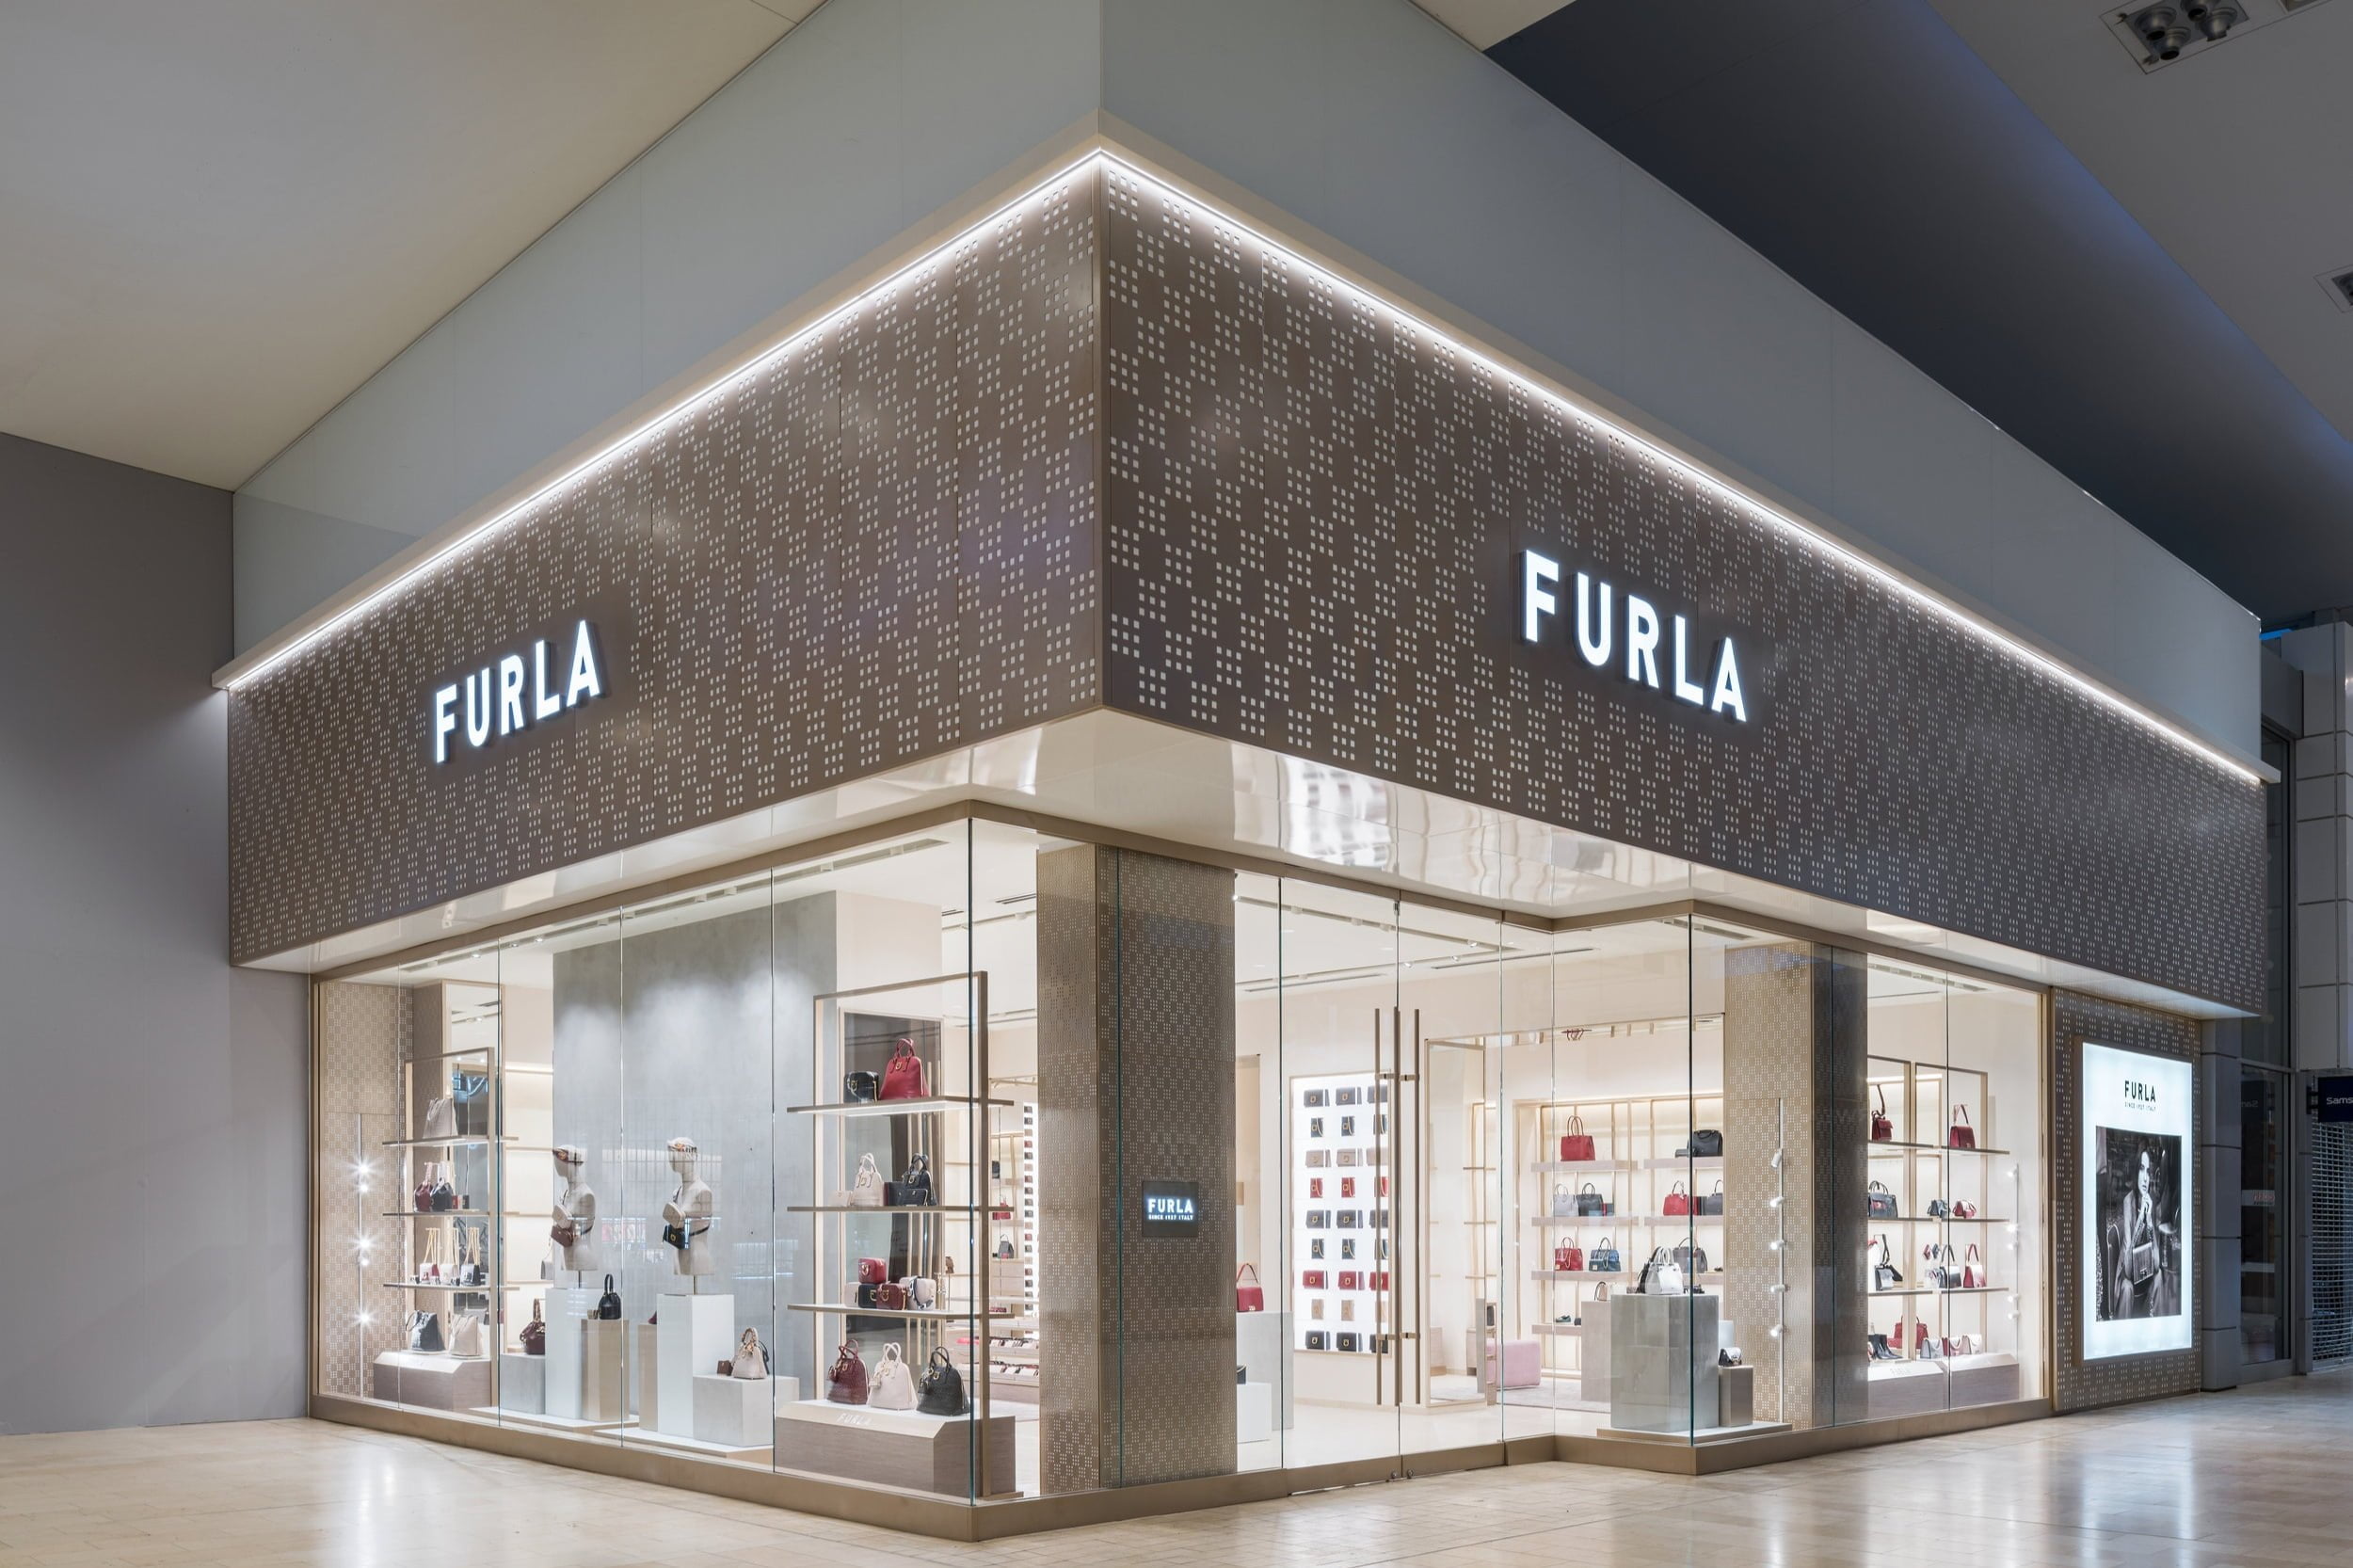 Luxury Italian 'Furla' Enters Canadian Market with Multi-Store Expansion [Photos]